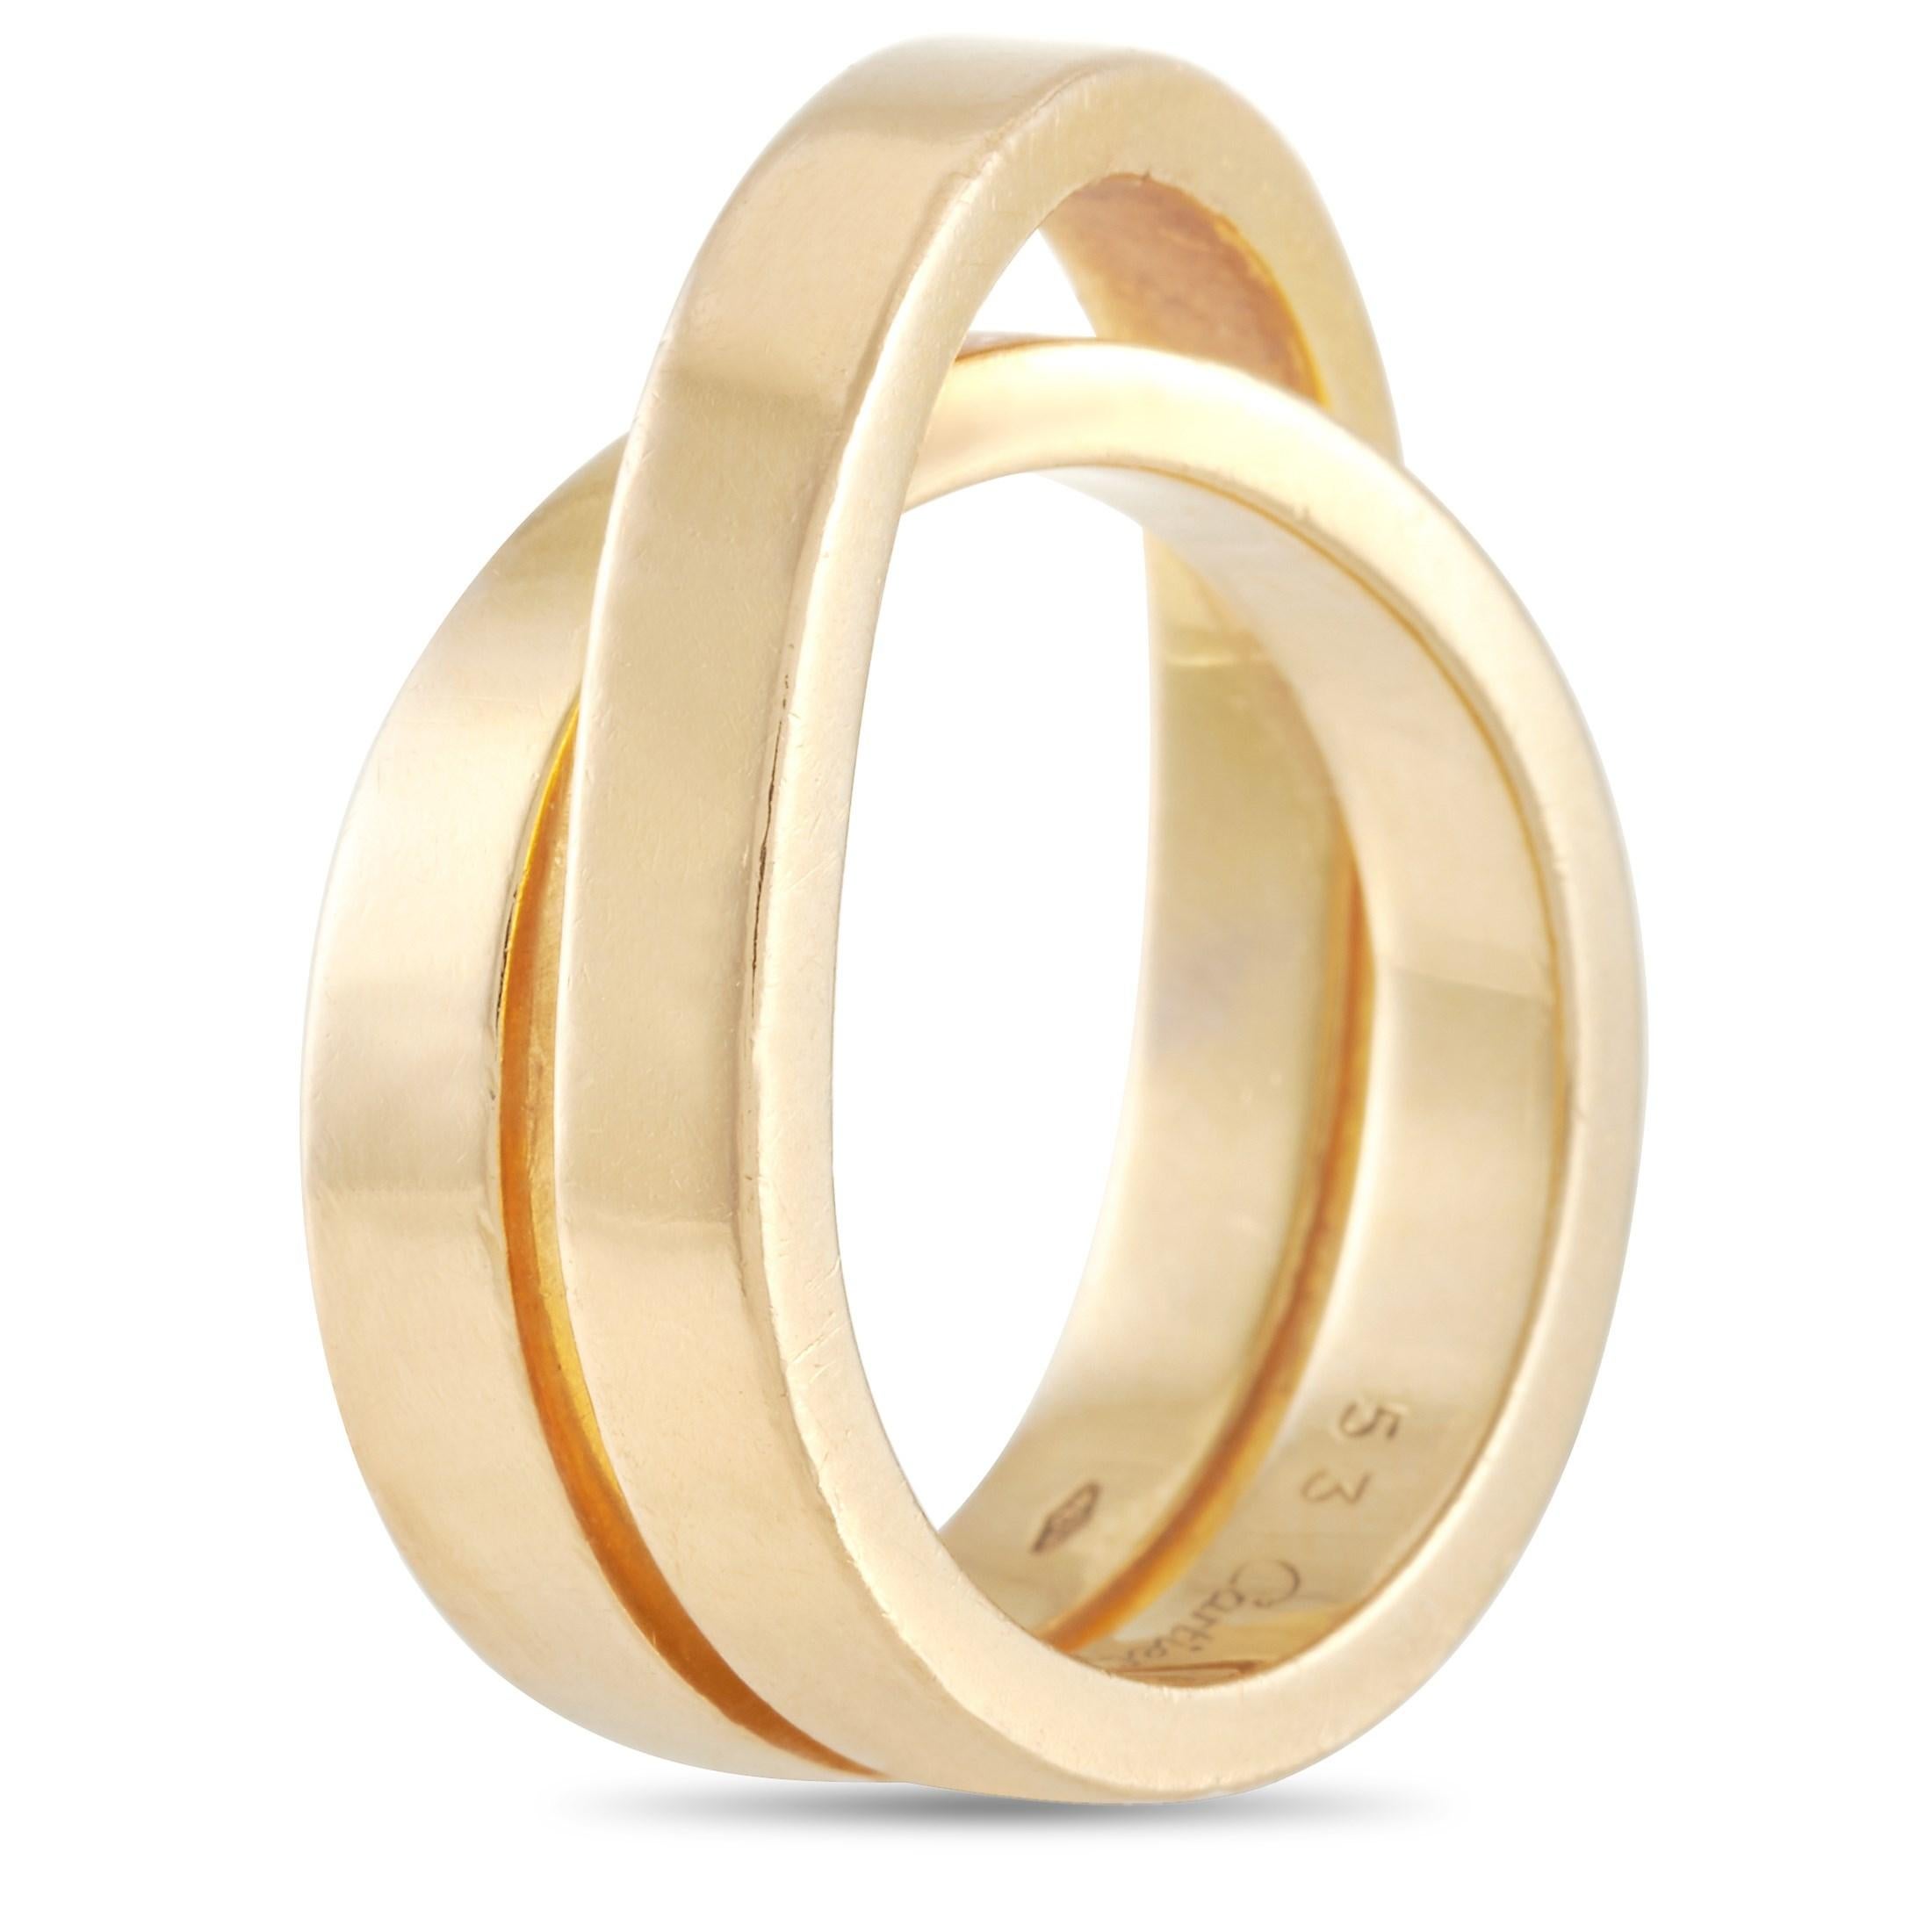 Cartier's Paris Nouvelle Vague collection is world renowned for its gorgeous designs which all have a natural flow to their designs. The ring is made of a single band of subtly intertwined 18K yellow gold to give the illusion of multiple